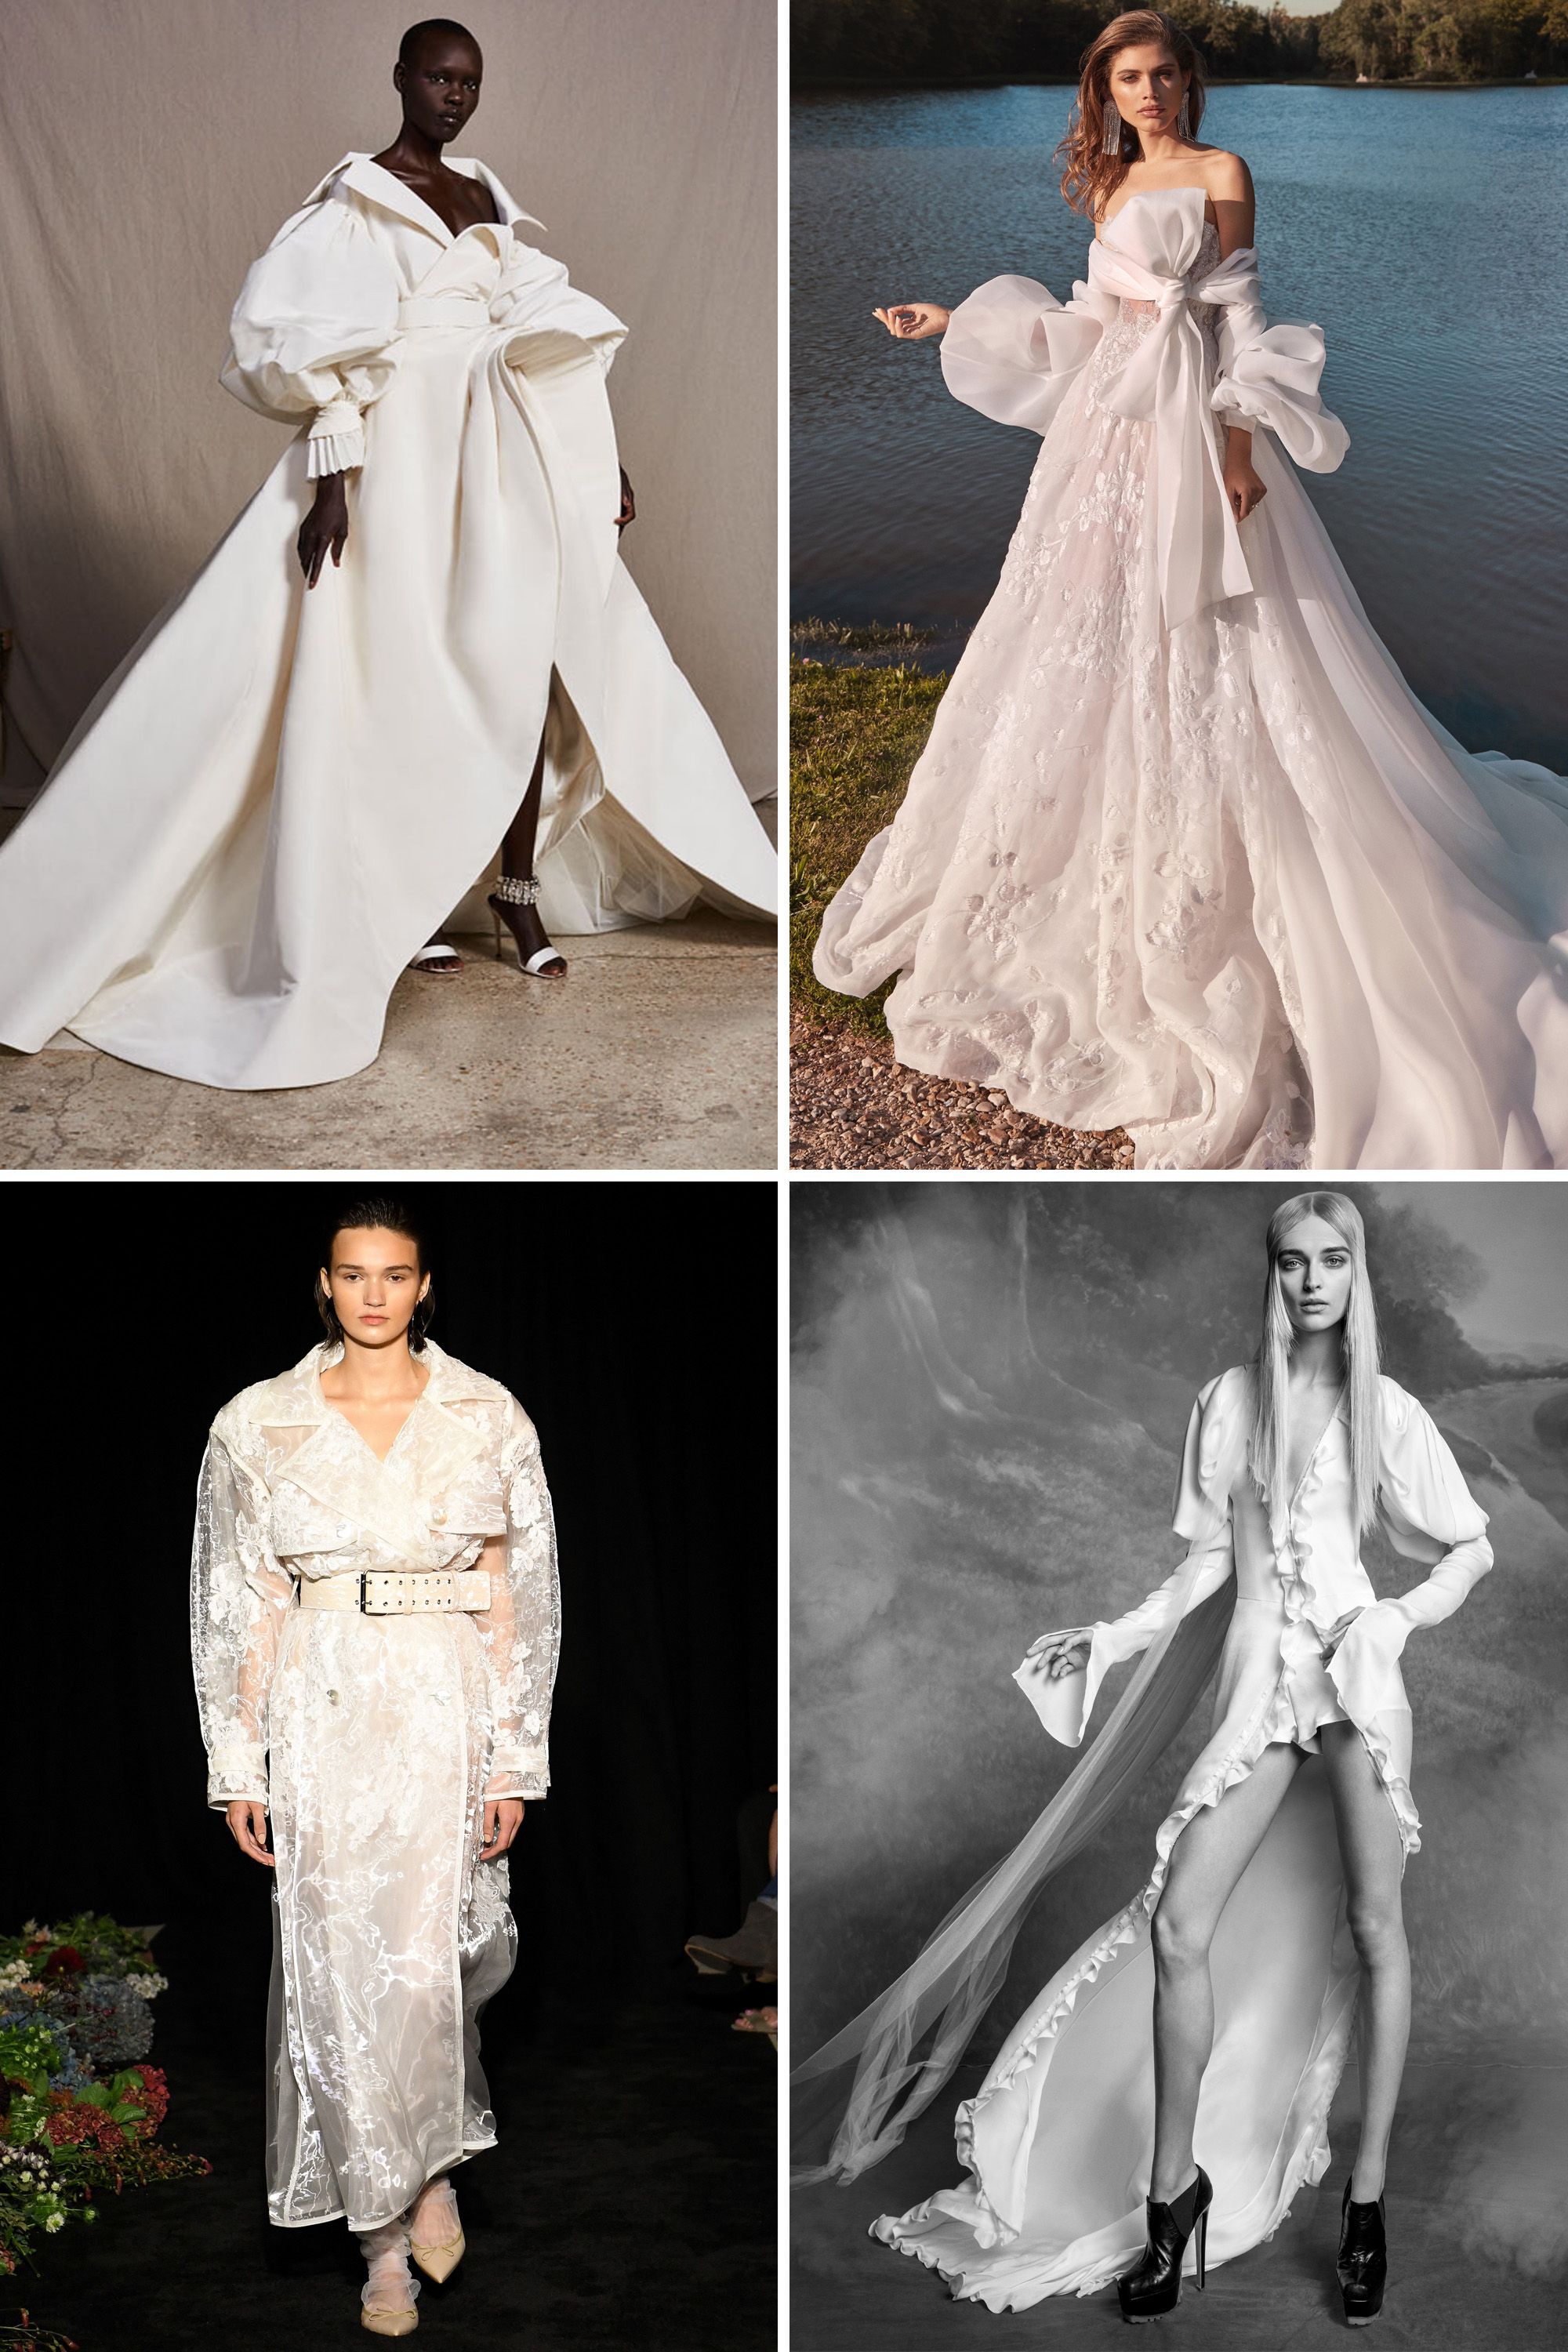 The Biggest Wedding Dress Trends of 2020 | The Everygirl